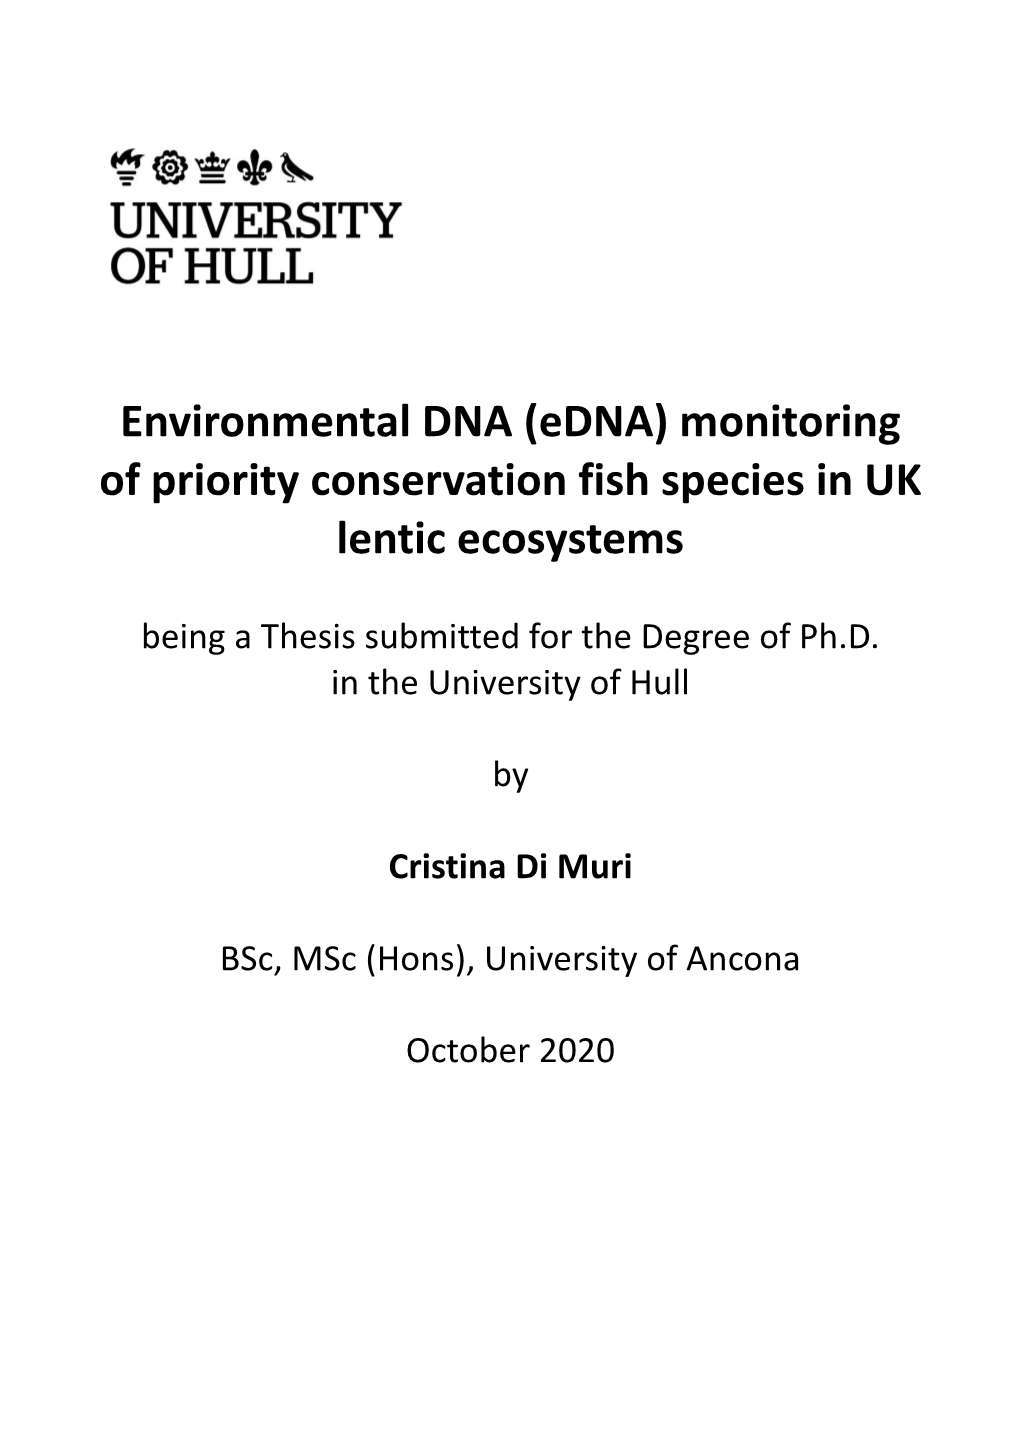 Environmental DNA (Edna) Monitoring of Priority Conservation Fish Species in UK Lentic Ecosystems